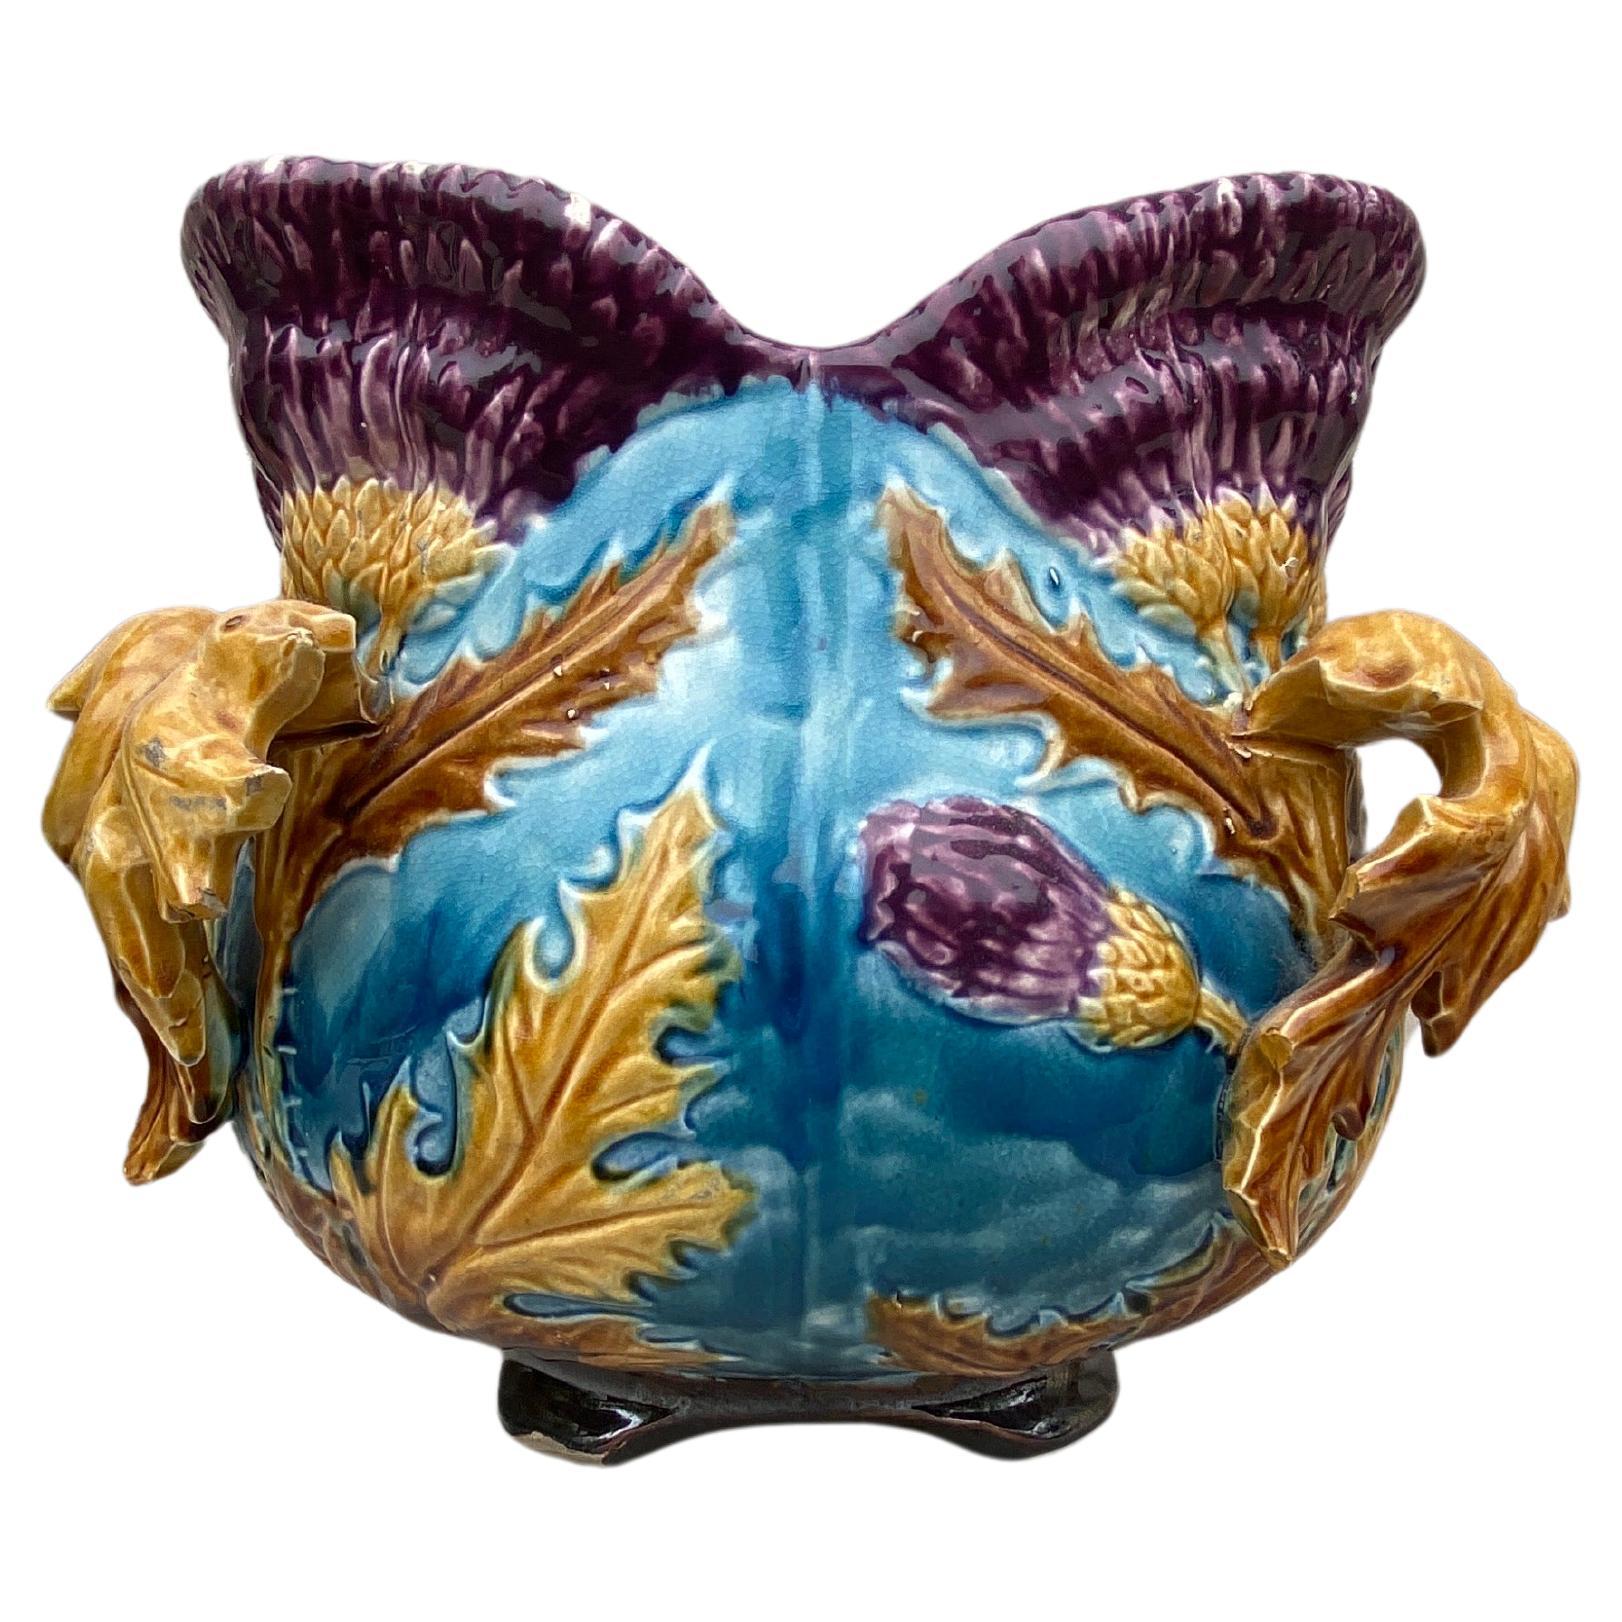 Large Majolica thistle jardinière Onnaing, circa 1880.
Height / 9.5 inches.
Diameter / 13 inches.